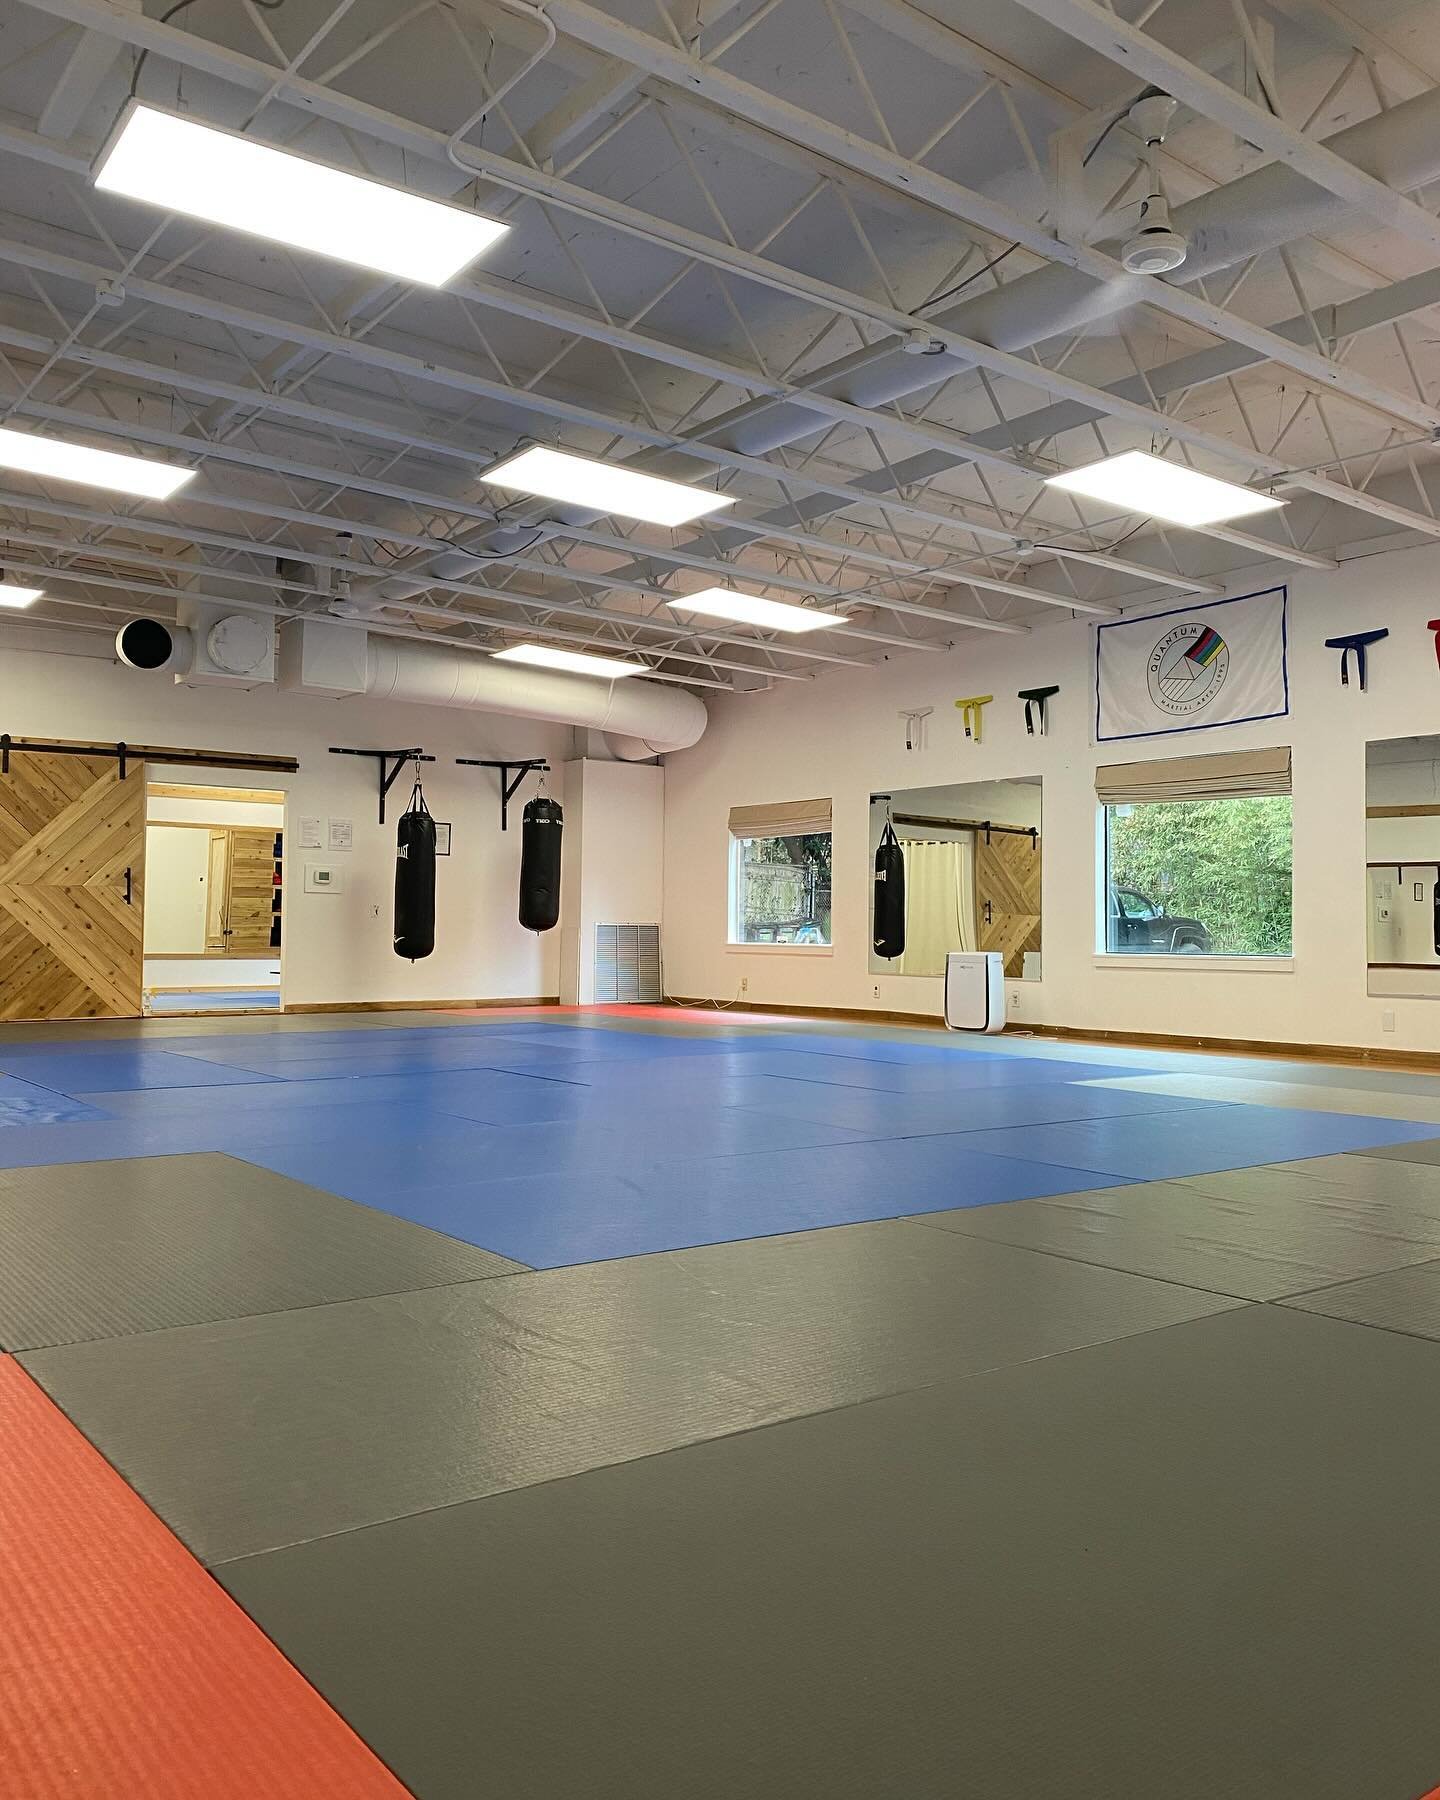 It&rsquo;s a quiet Monday afternoon in our bright freshly cleaned dojo!  Thank you to all of our volunteers that help keep our space in good order.  #community #grattitude #growingupinadojo